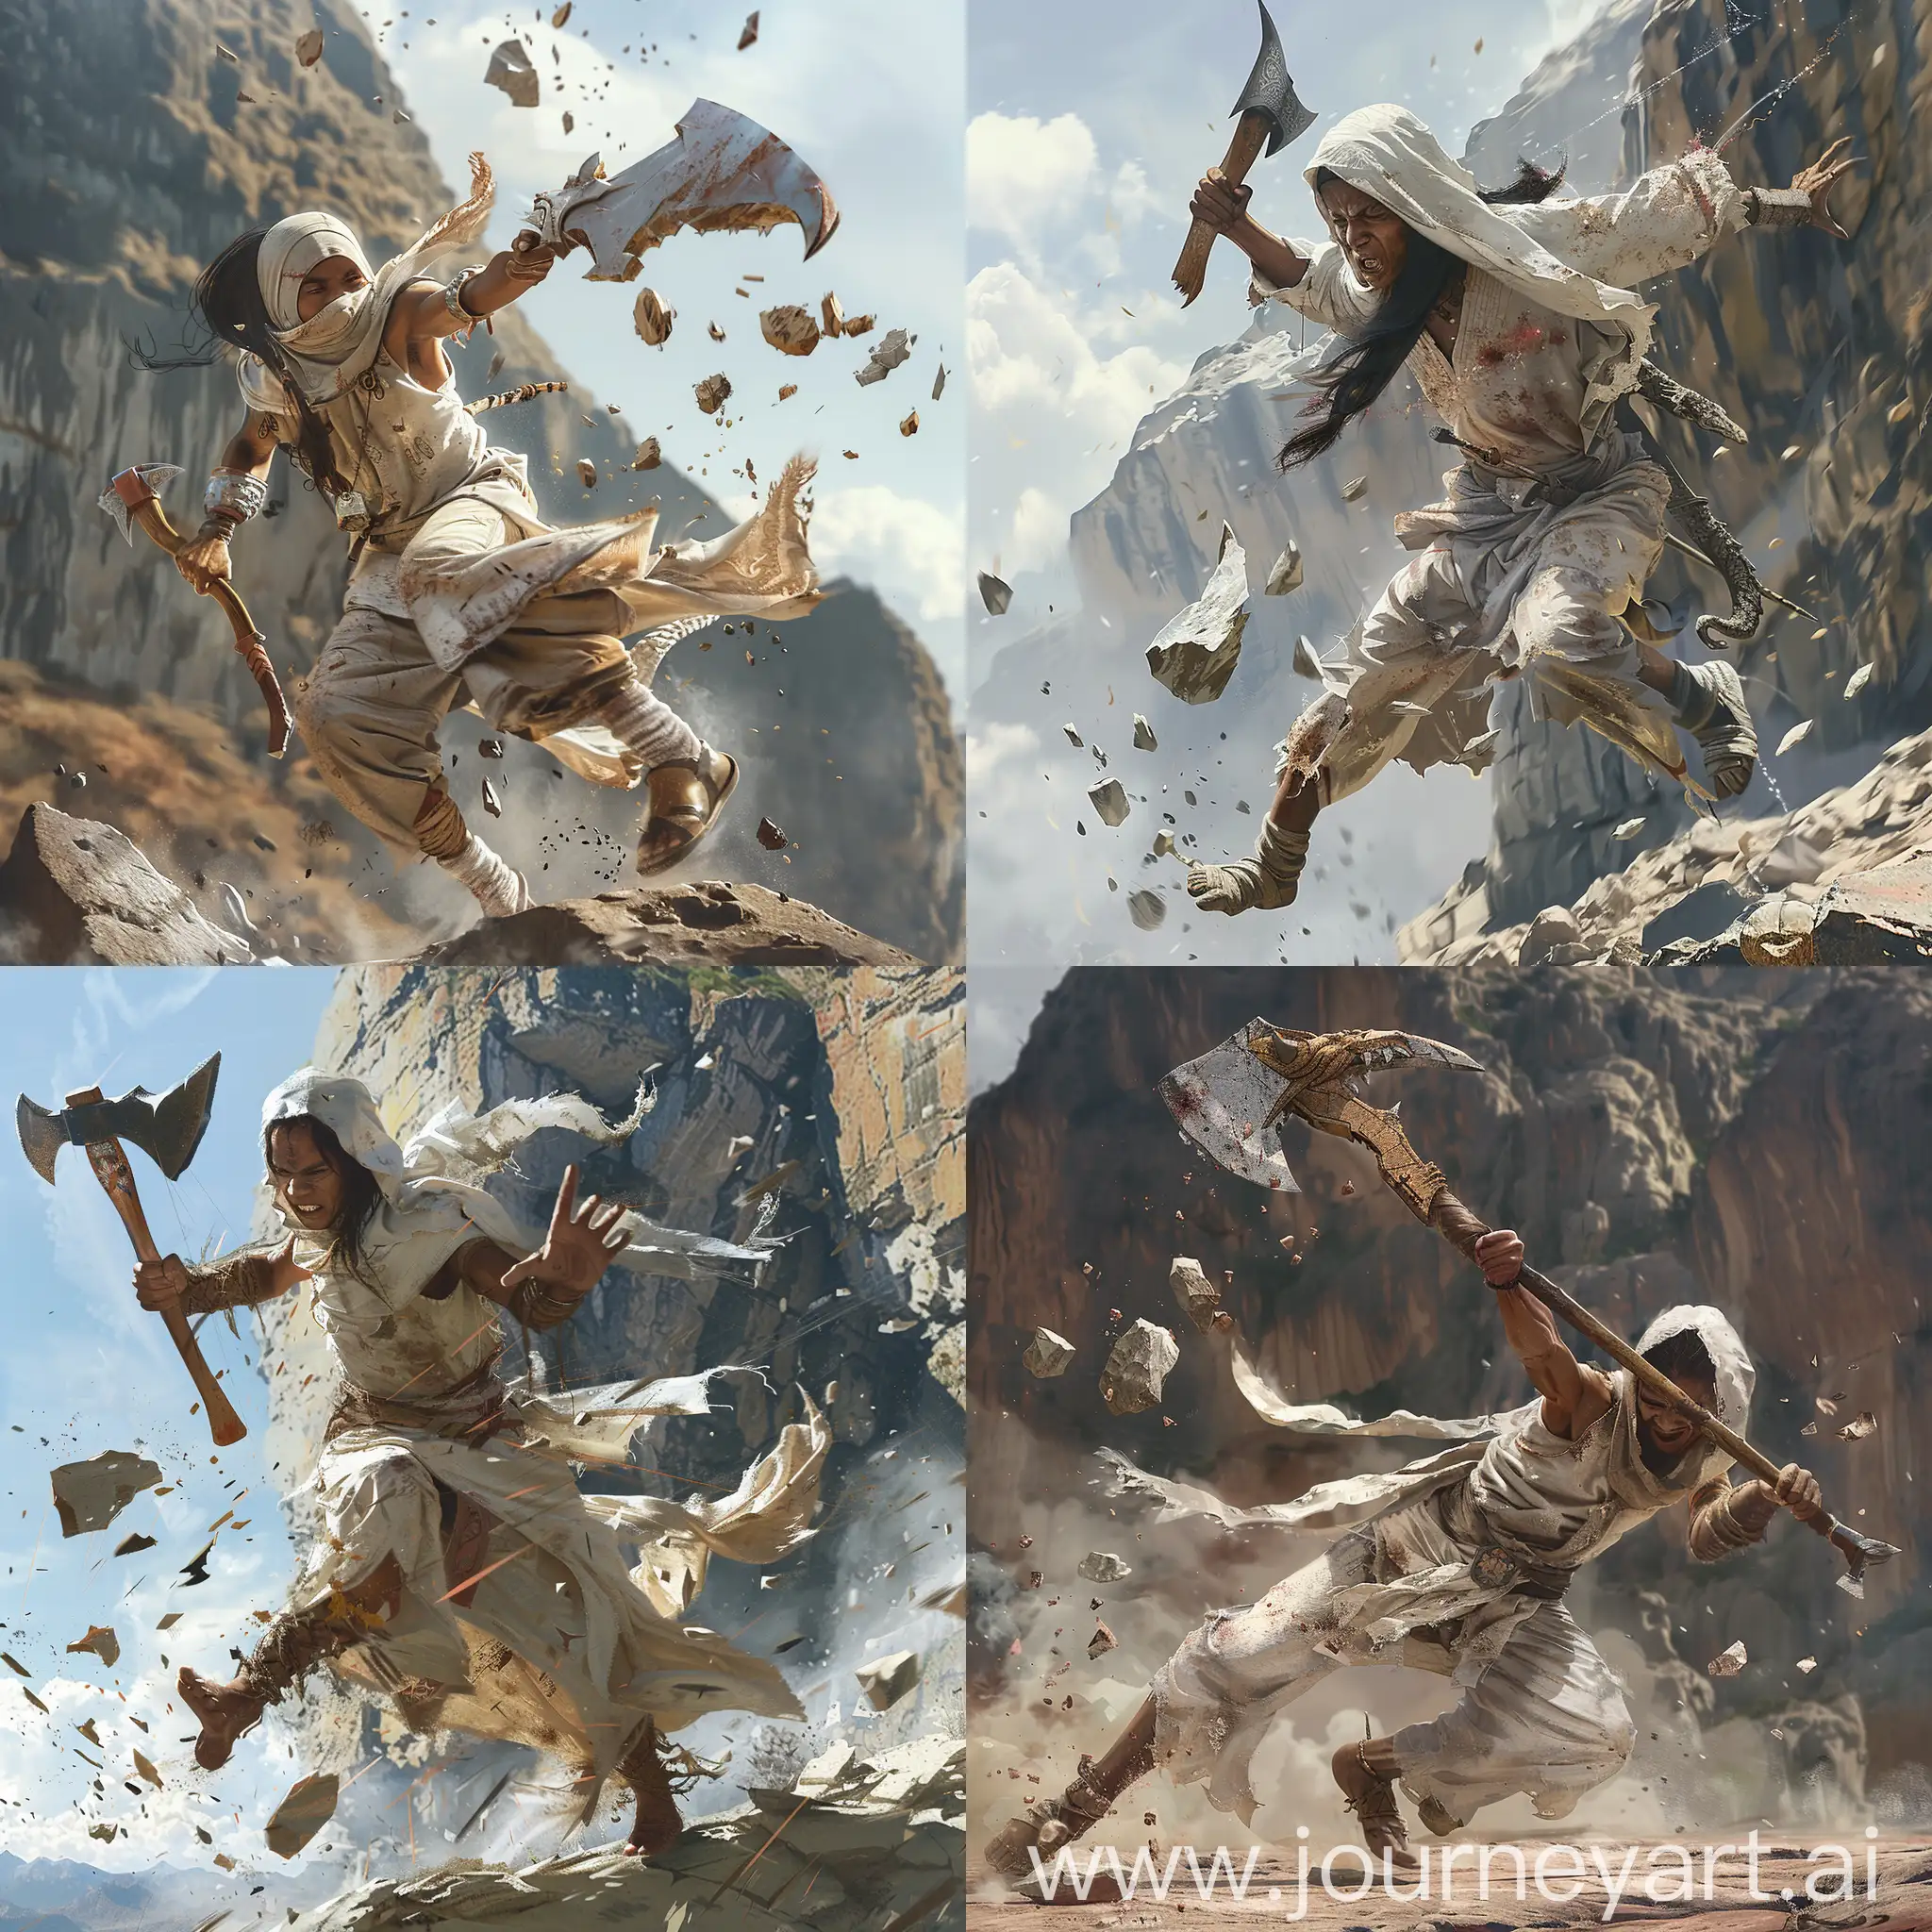 A 20 year old Indonesian warrior. Wearing dirty white clothes. Brown skin color. Long black hair. Wearing a dirty white headscarf. A short ax with a dragon-shaped handle, leaps into the air while throwing a double-edged sword. Stone fragments flew from the impact. Stone mountain background. HDR.